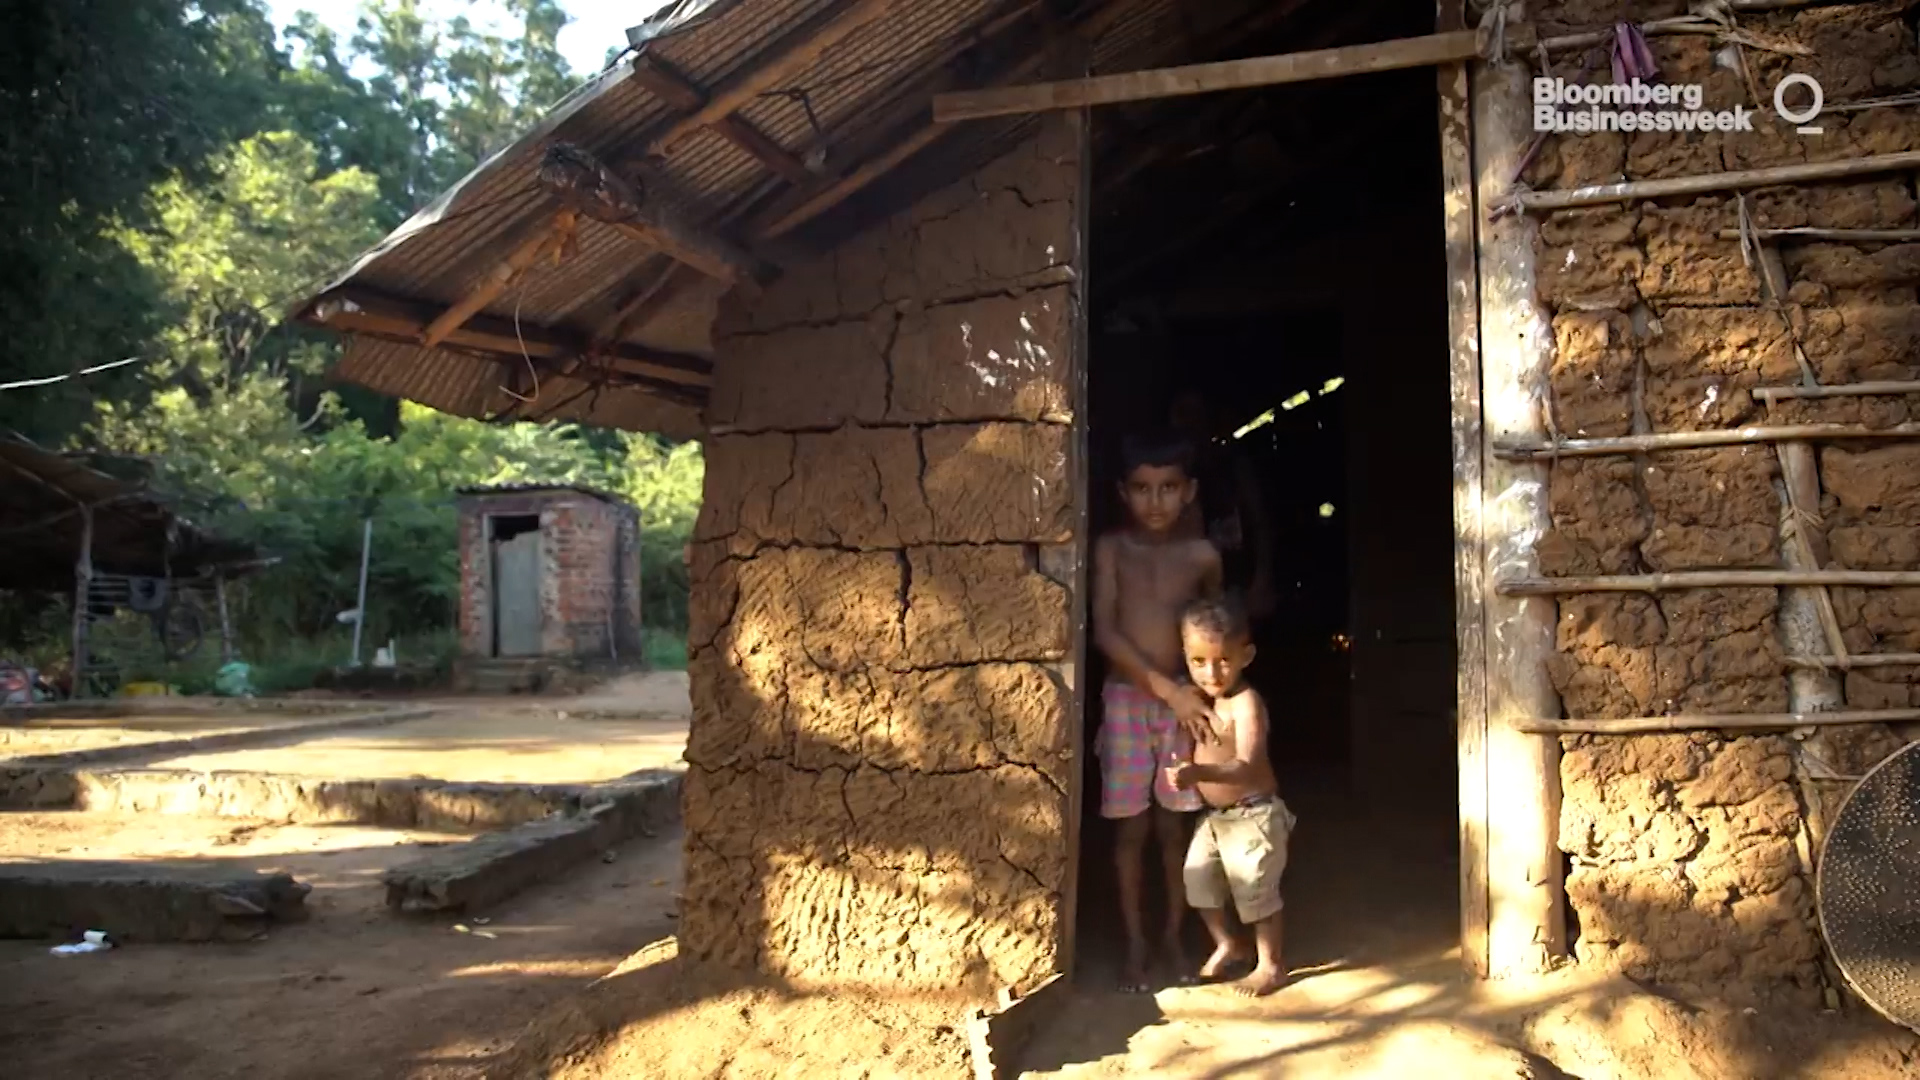 The image is of two young children in a hut. They live in a third world impoverished community.